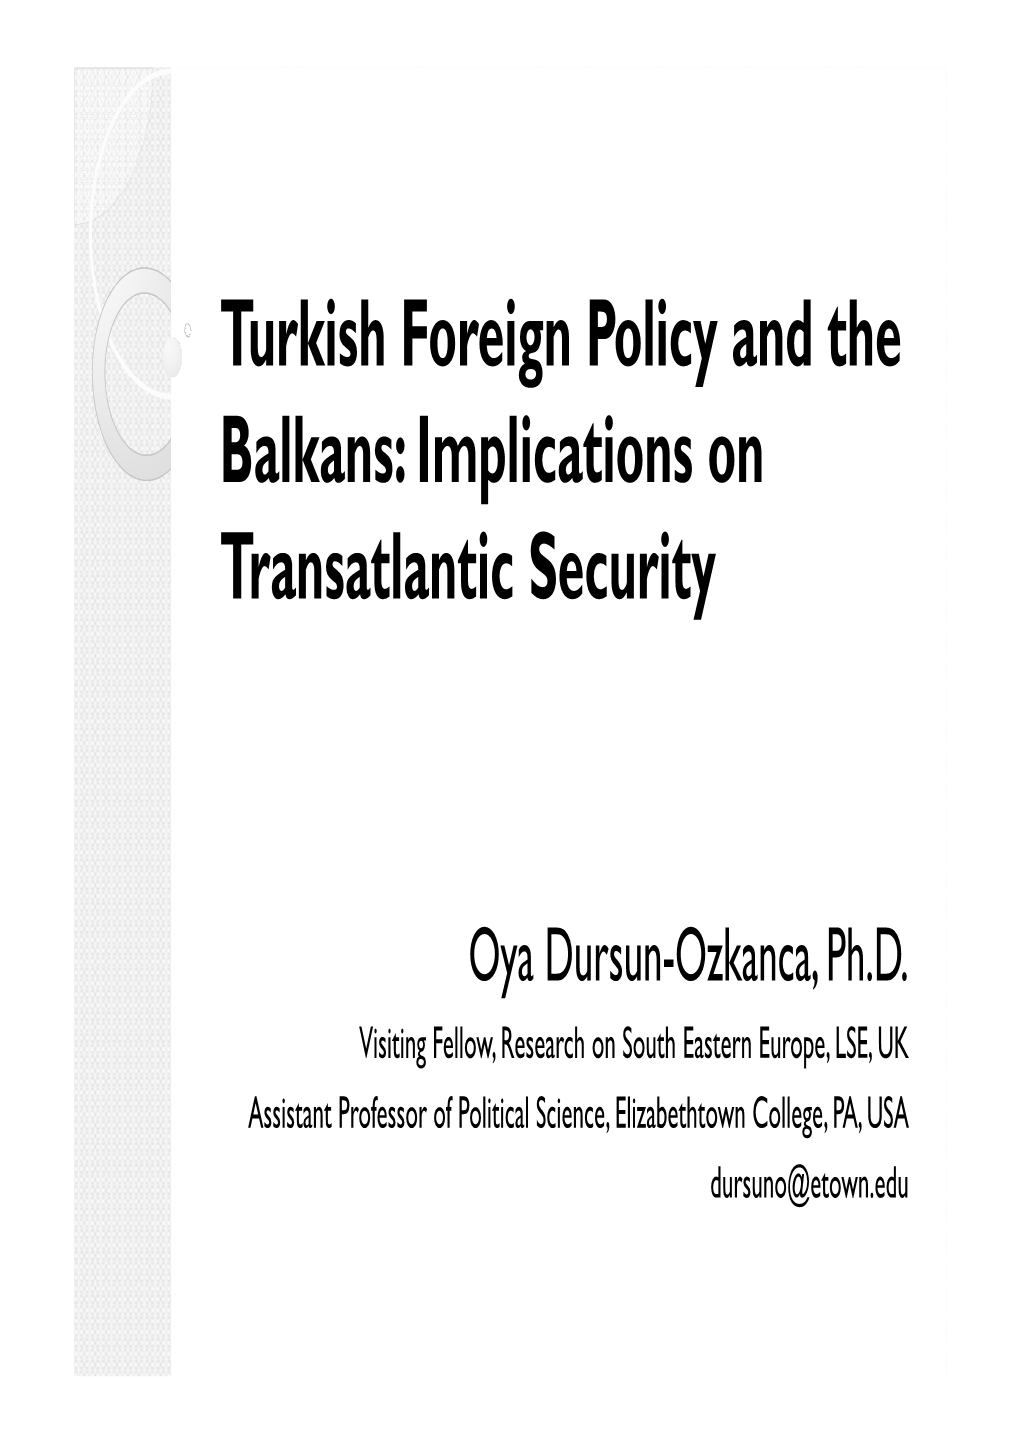 Turkish Foreign Policy and the Balkans: Implications on Transatlantic Security